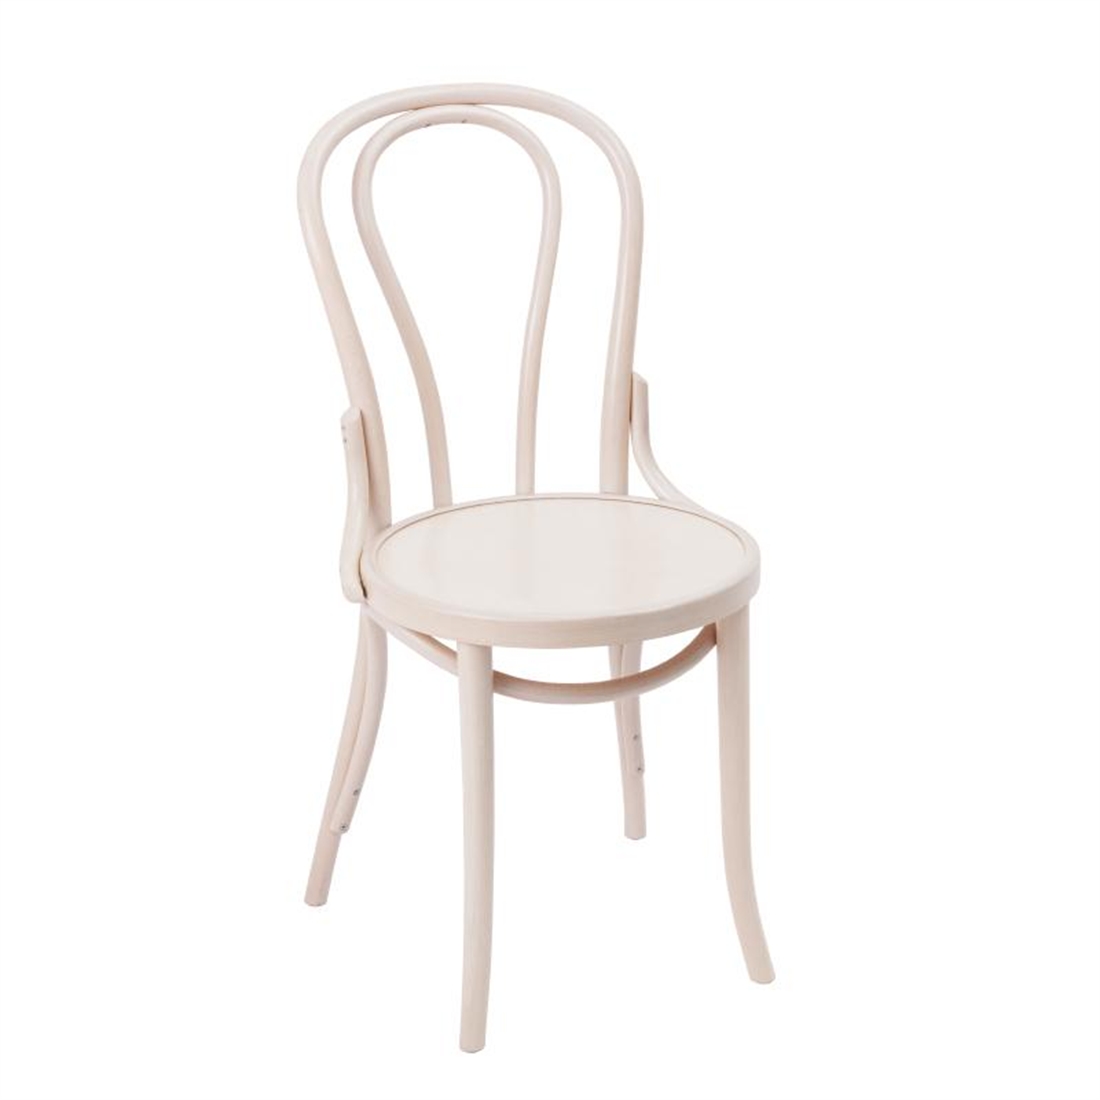 Fameg Bentwood Bistro Sidechair White (Pack of 2)